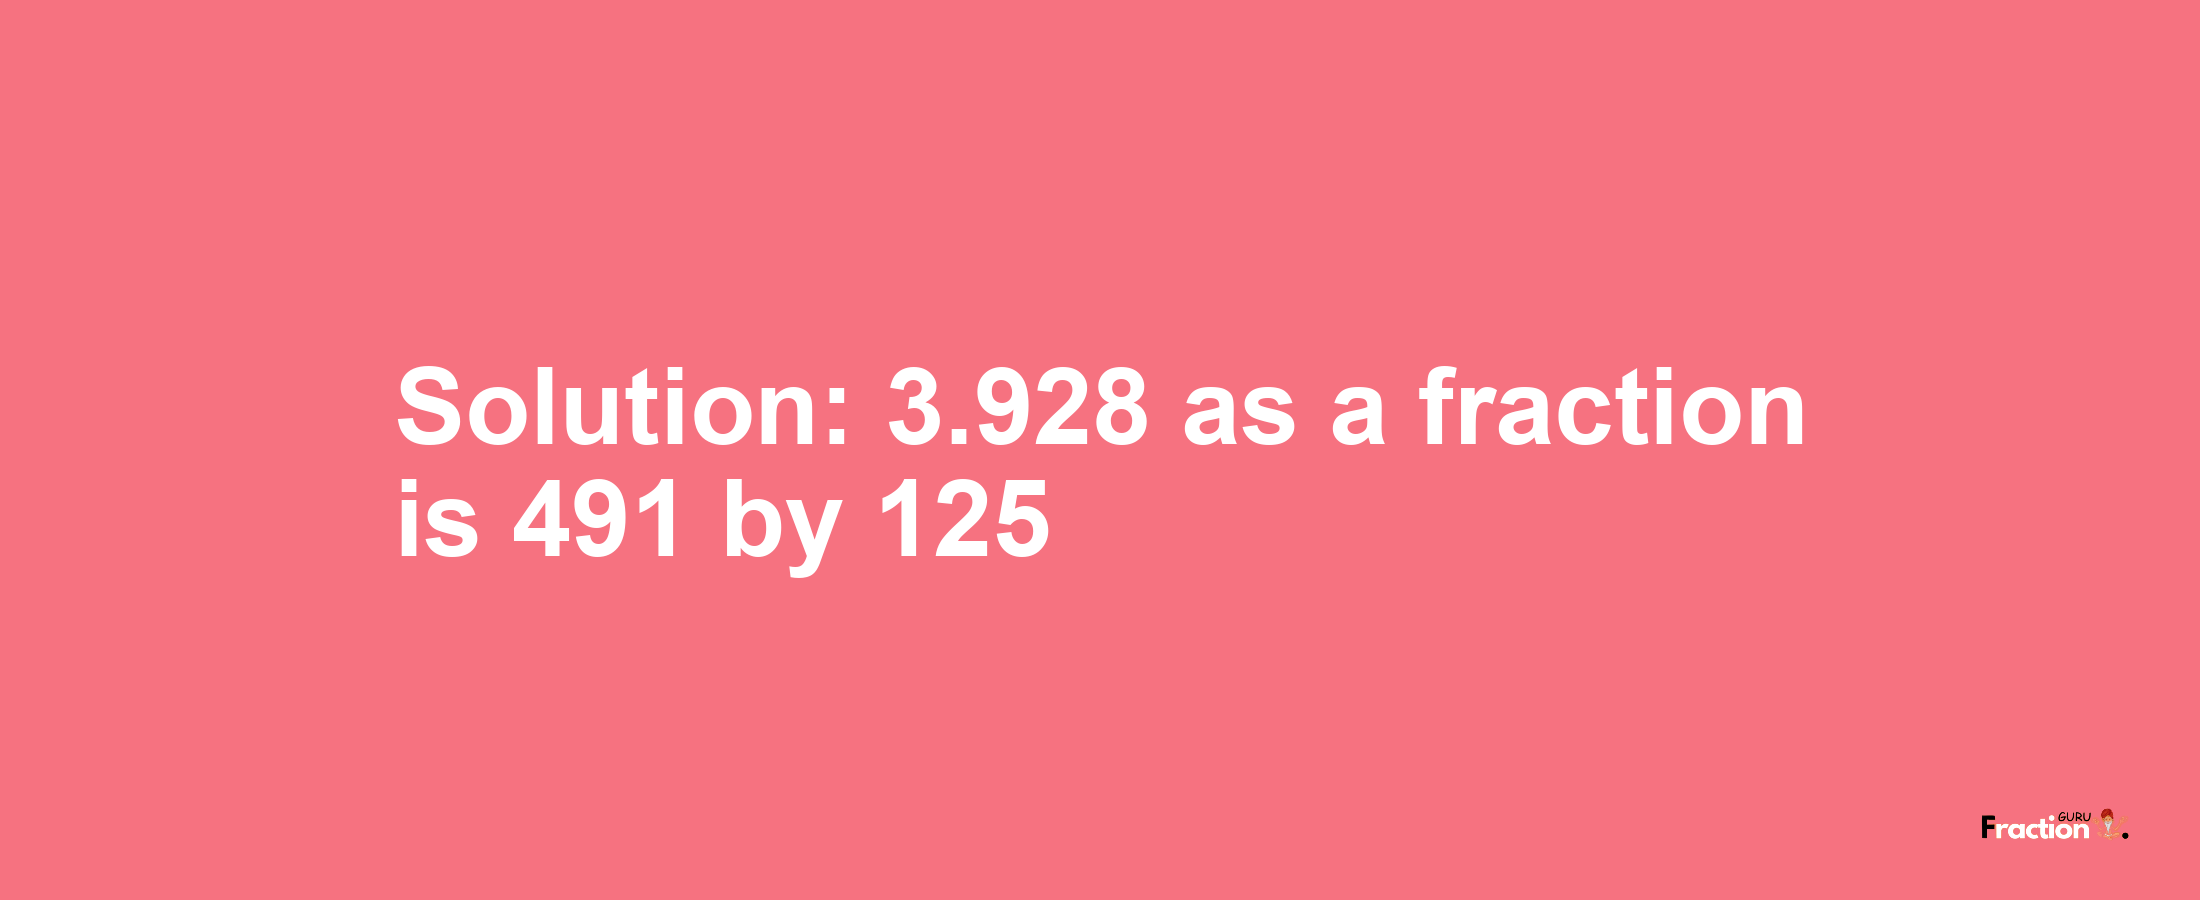 Solution:3.928 as a fraction is 491/125